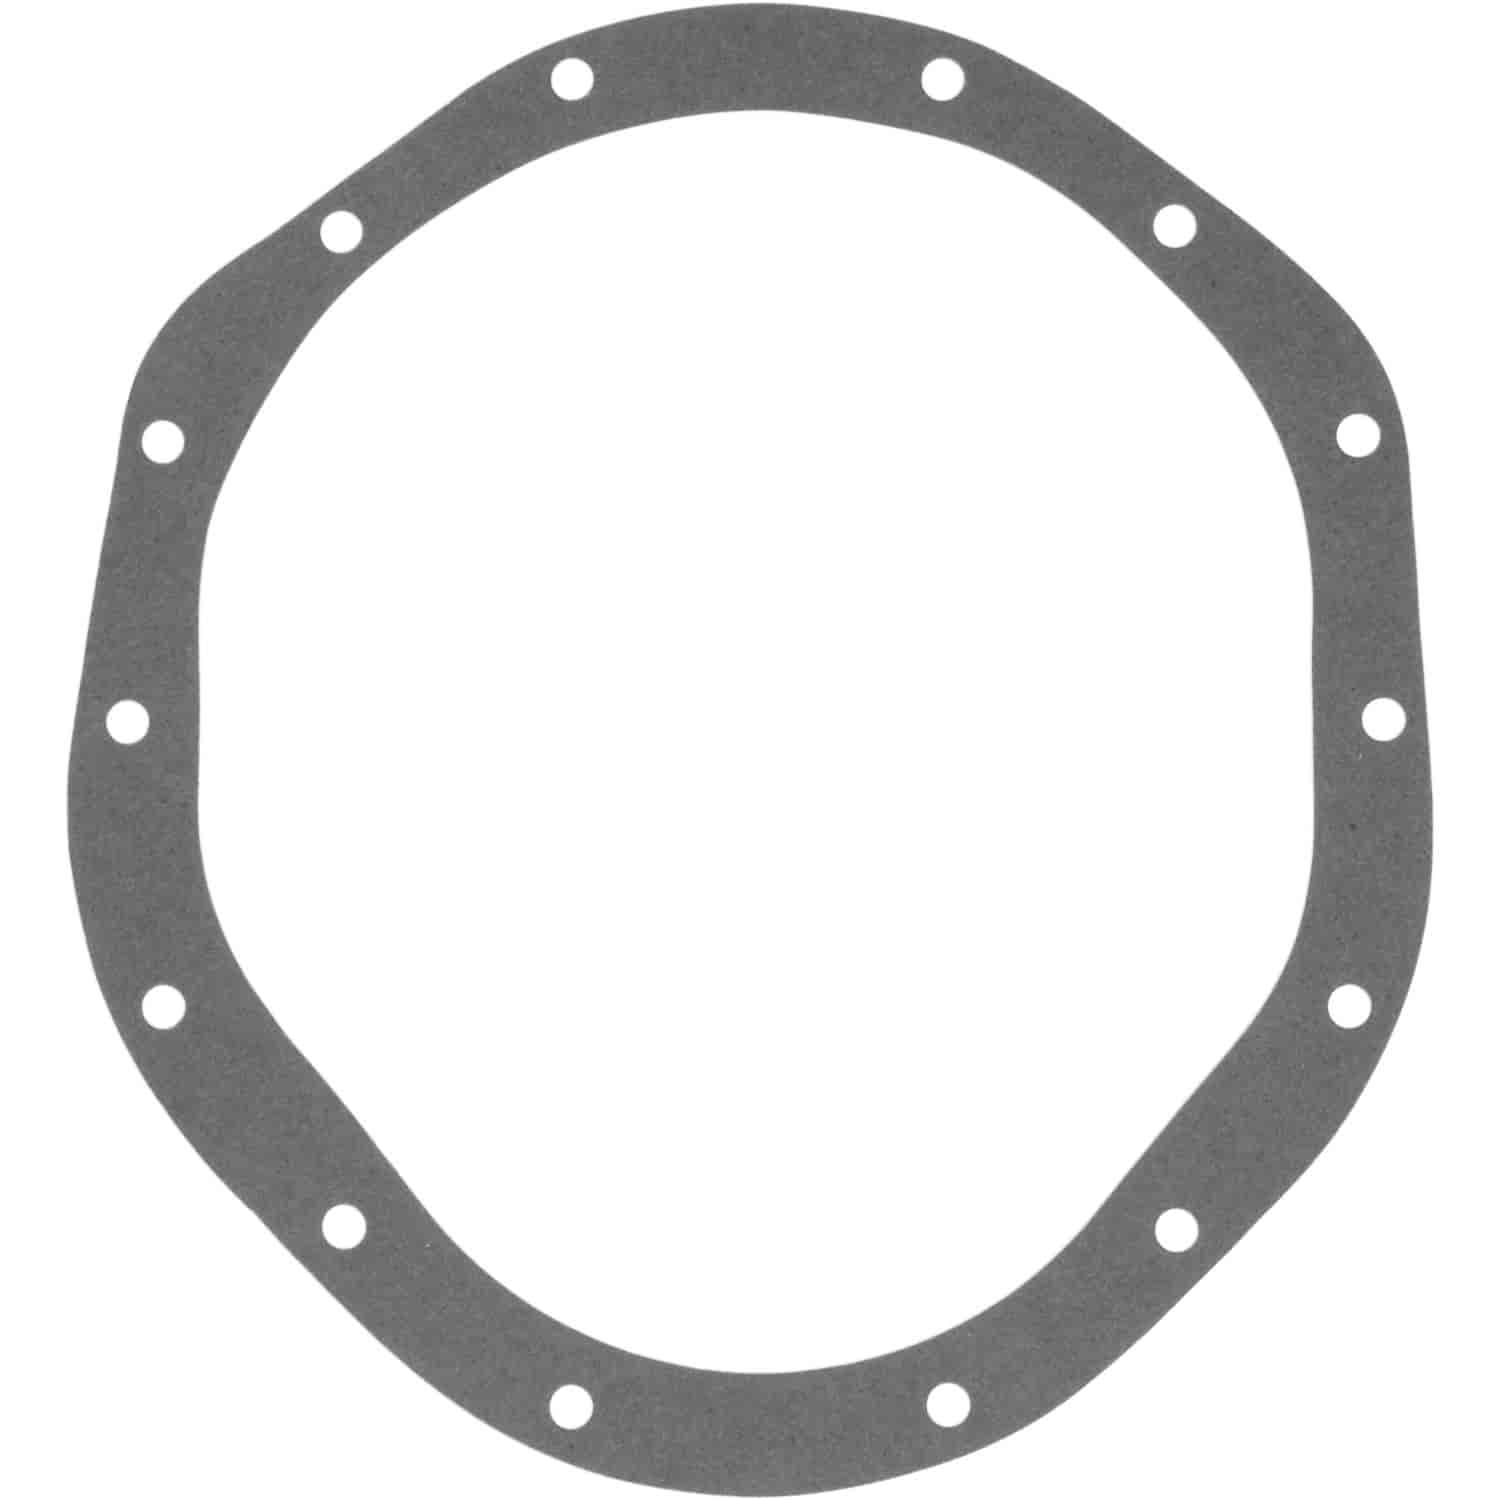 Differential Cover Gasket GMC 14-Bolt Truck (9.5" Ring Gear)